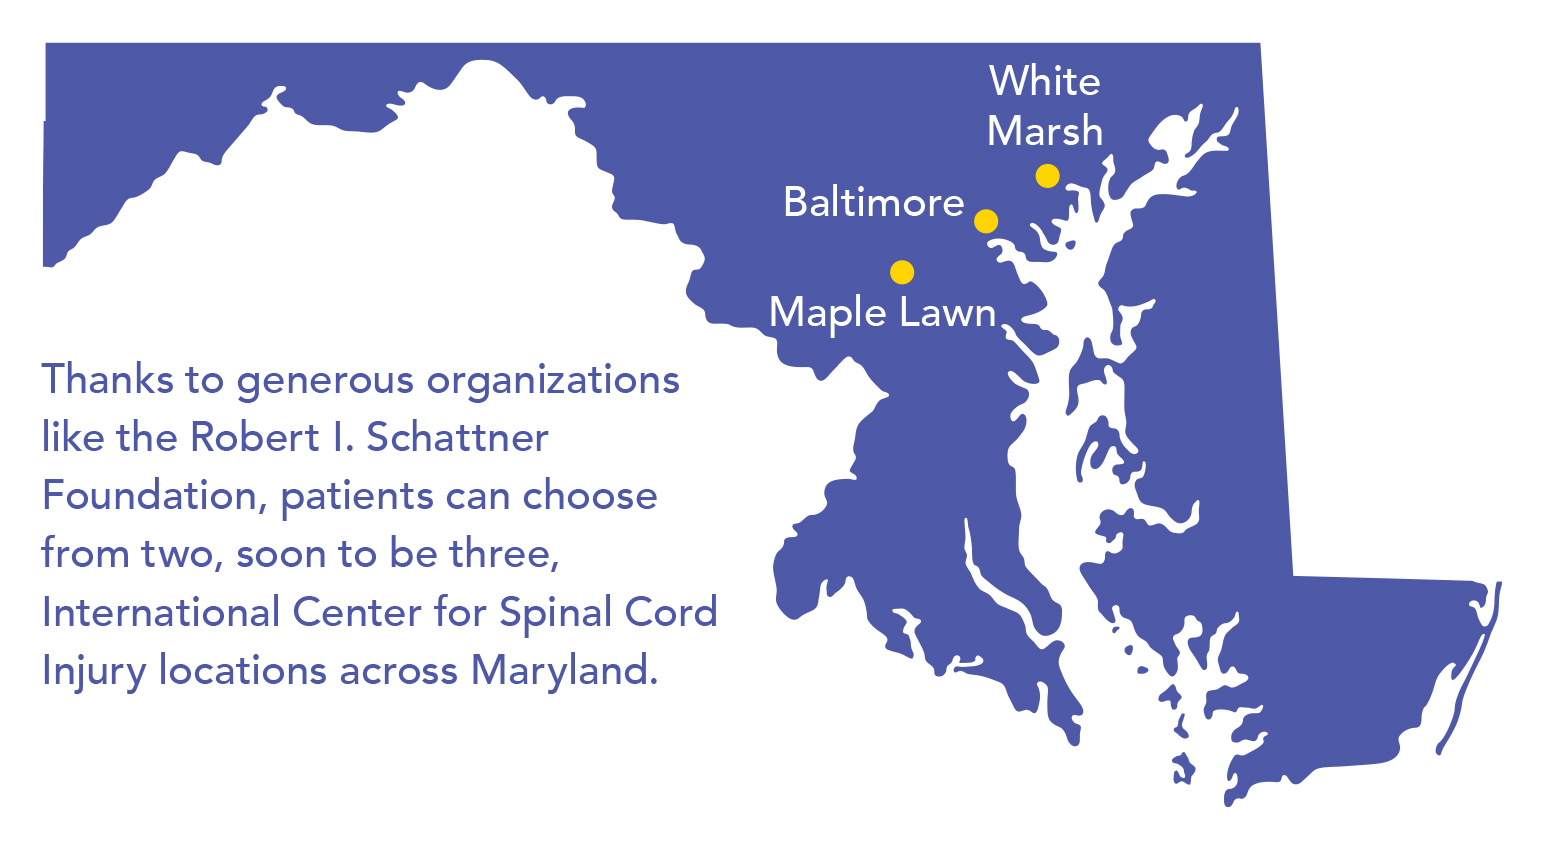 A map of Maryland, showing the locations of Baltimore, White Marsh and Maple Lawn. White Marsh and Maple Lawn are nearly equidistant from Baltimore. White Marsh, to the northeast of Baltimmore, is just a little farther away from Baltimore than is Maple Lawn, to the southeast of the city. All three locations are in the central part of the state.